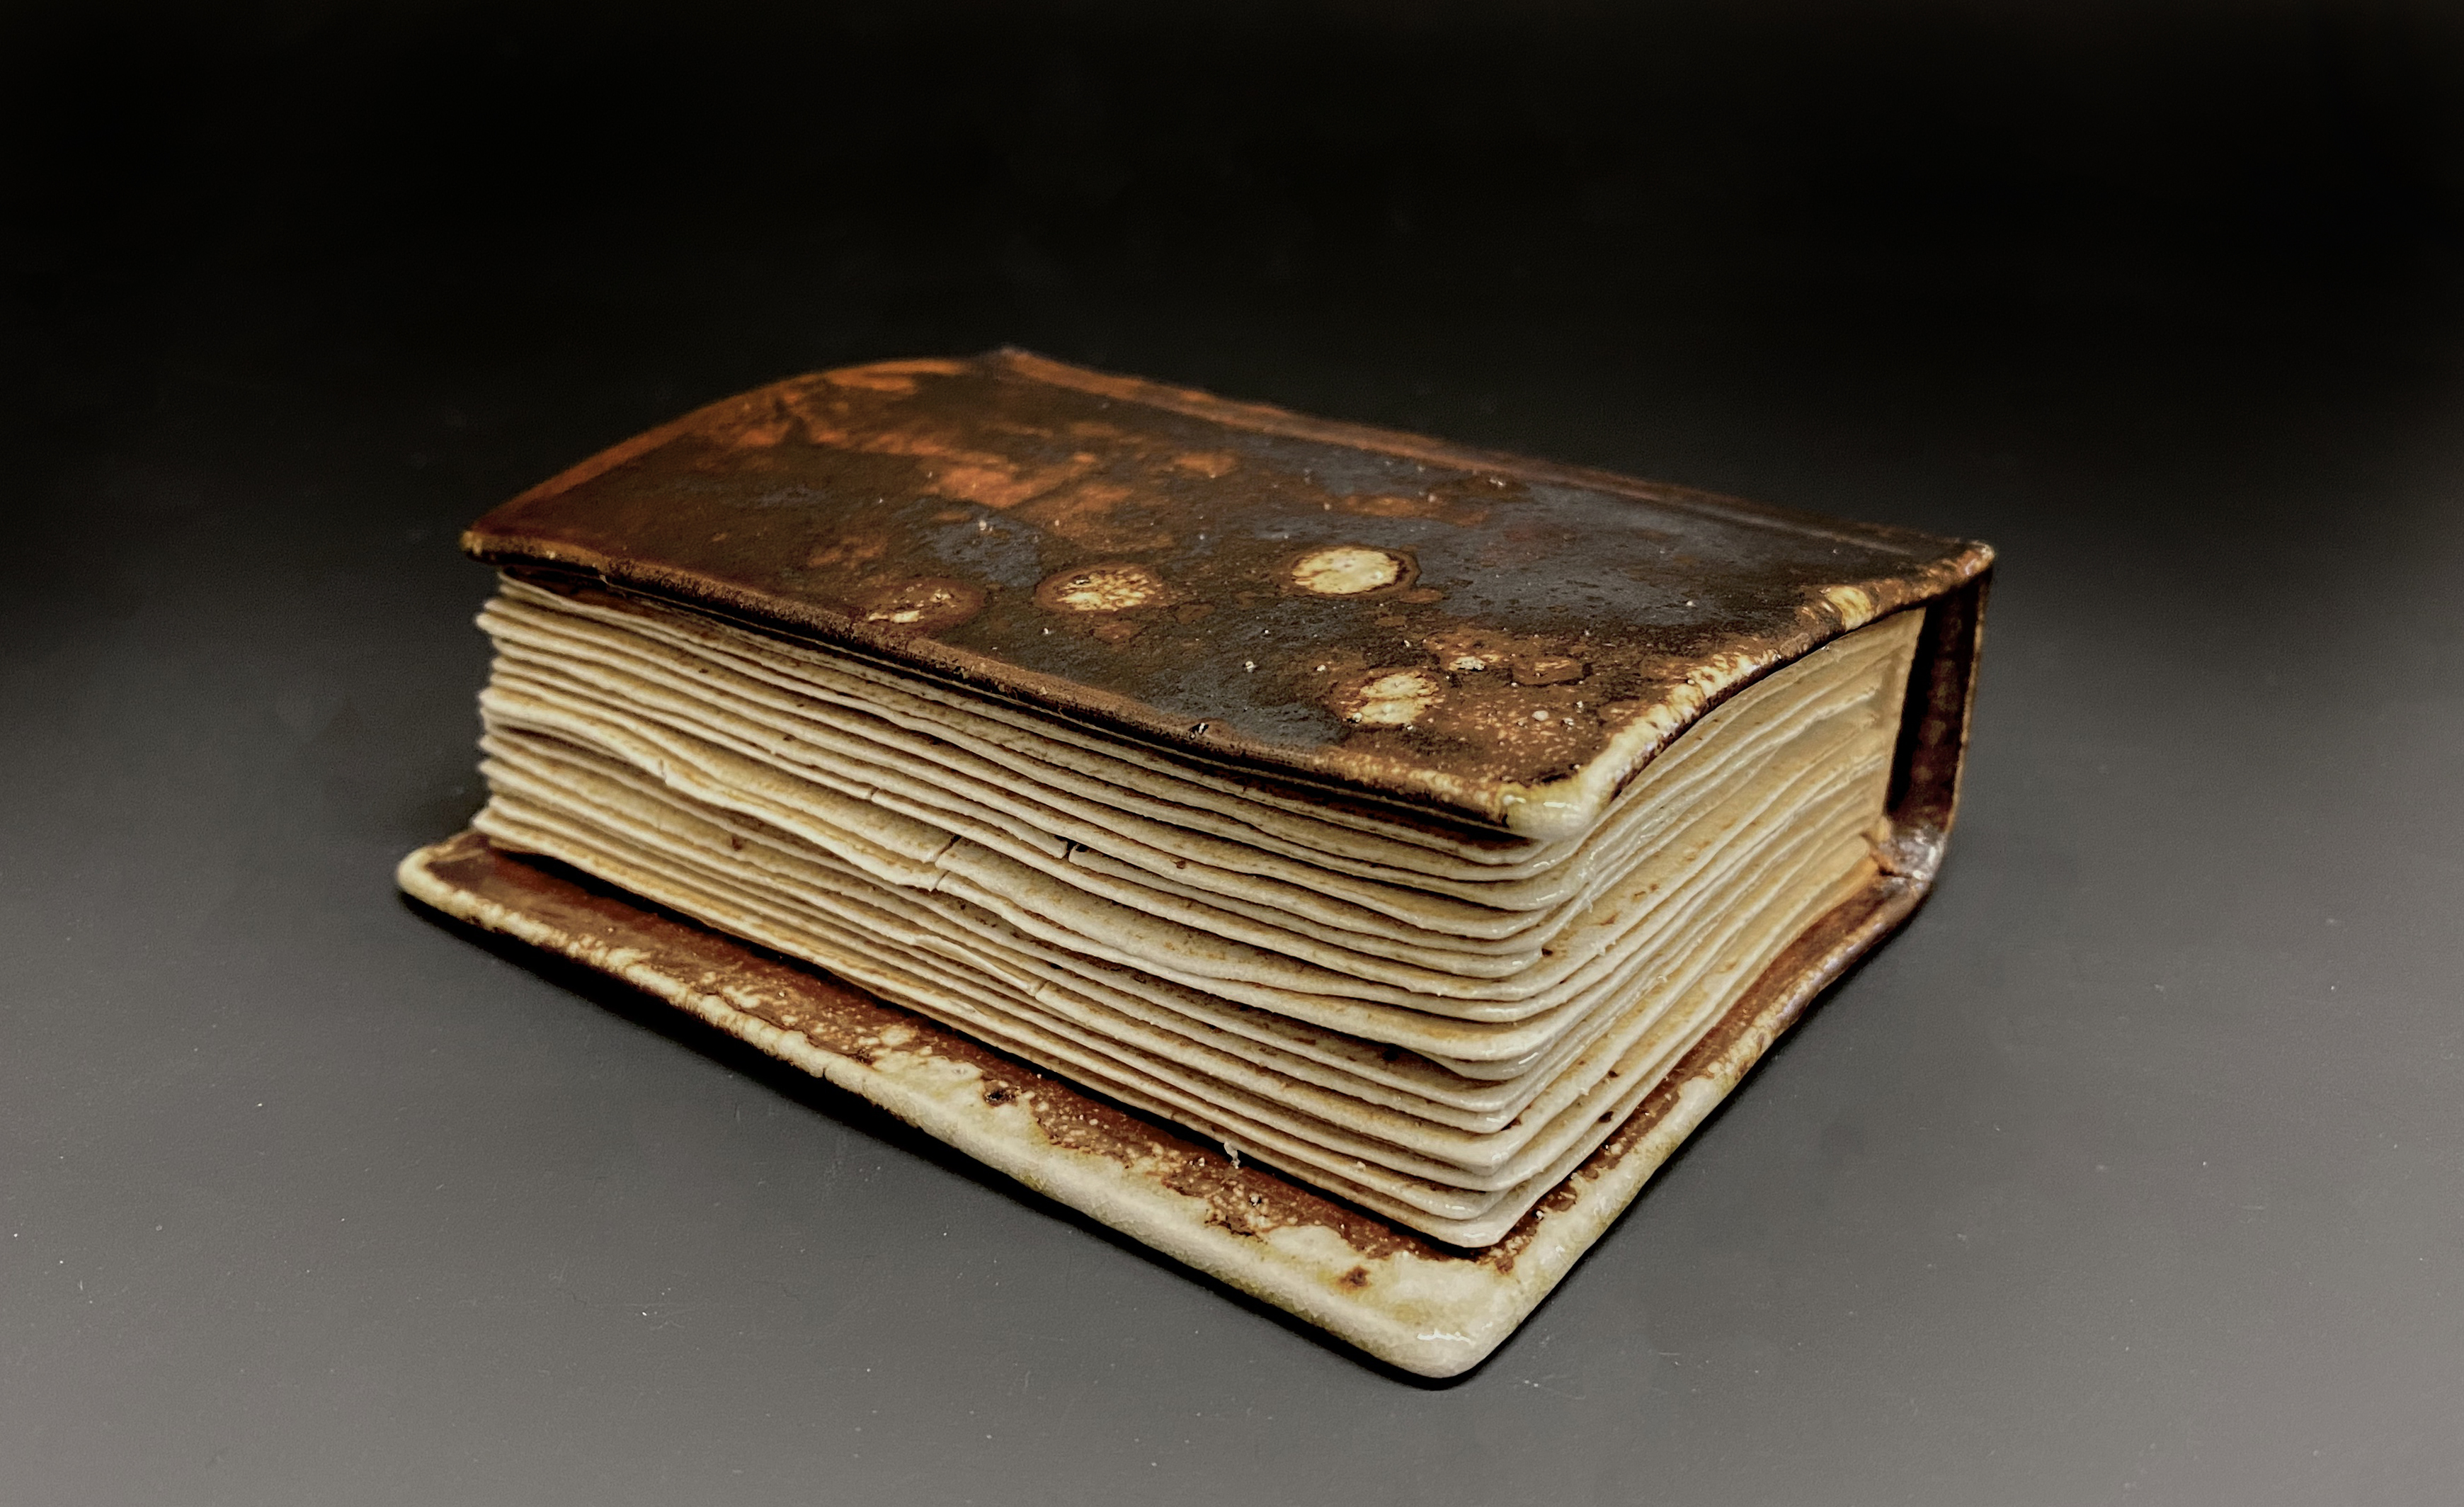 A ceramic sculpture depicts what appears to be an ancient book